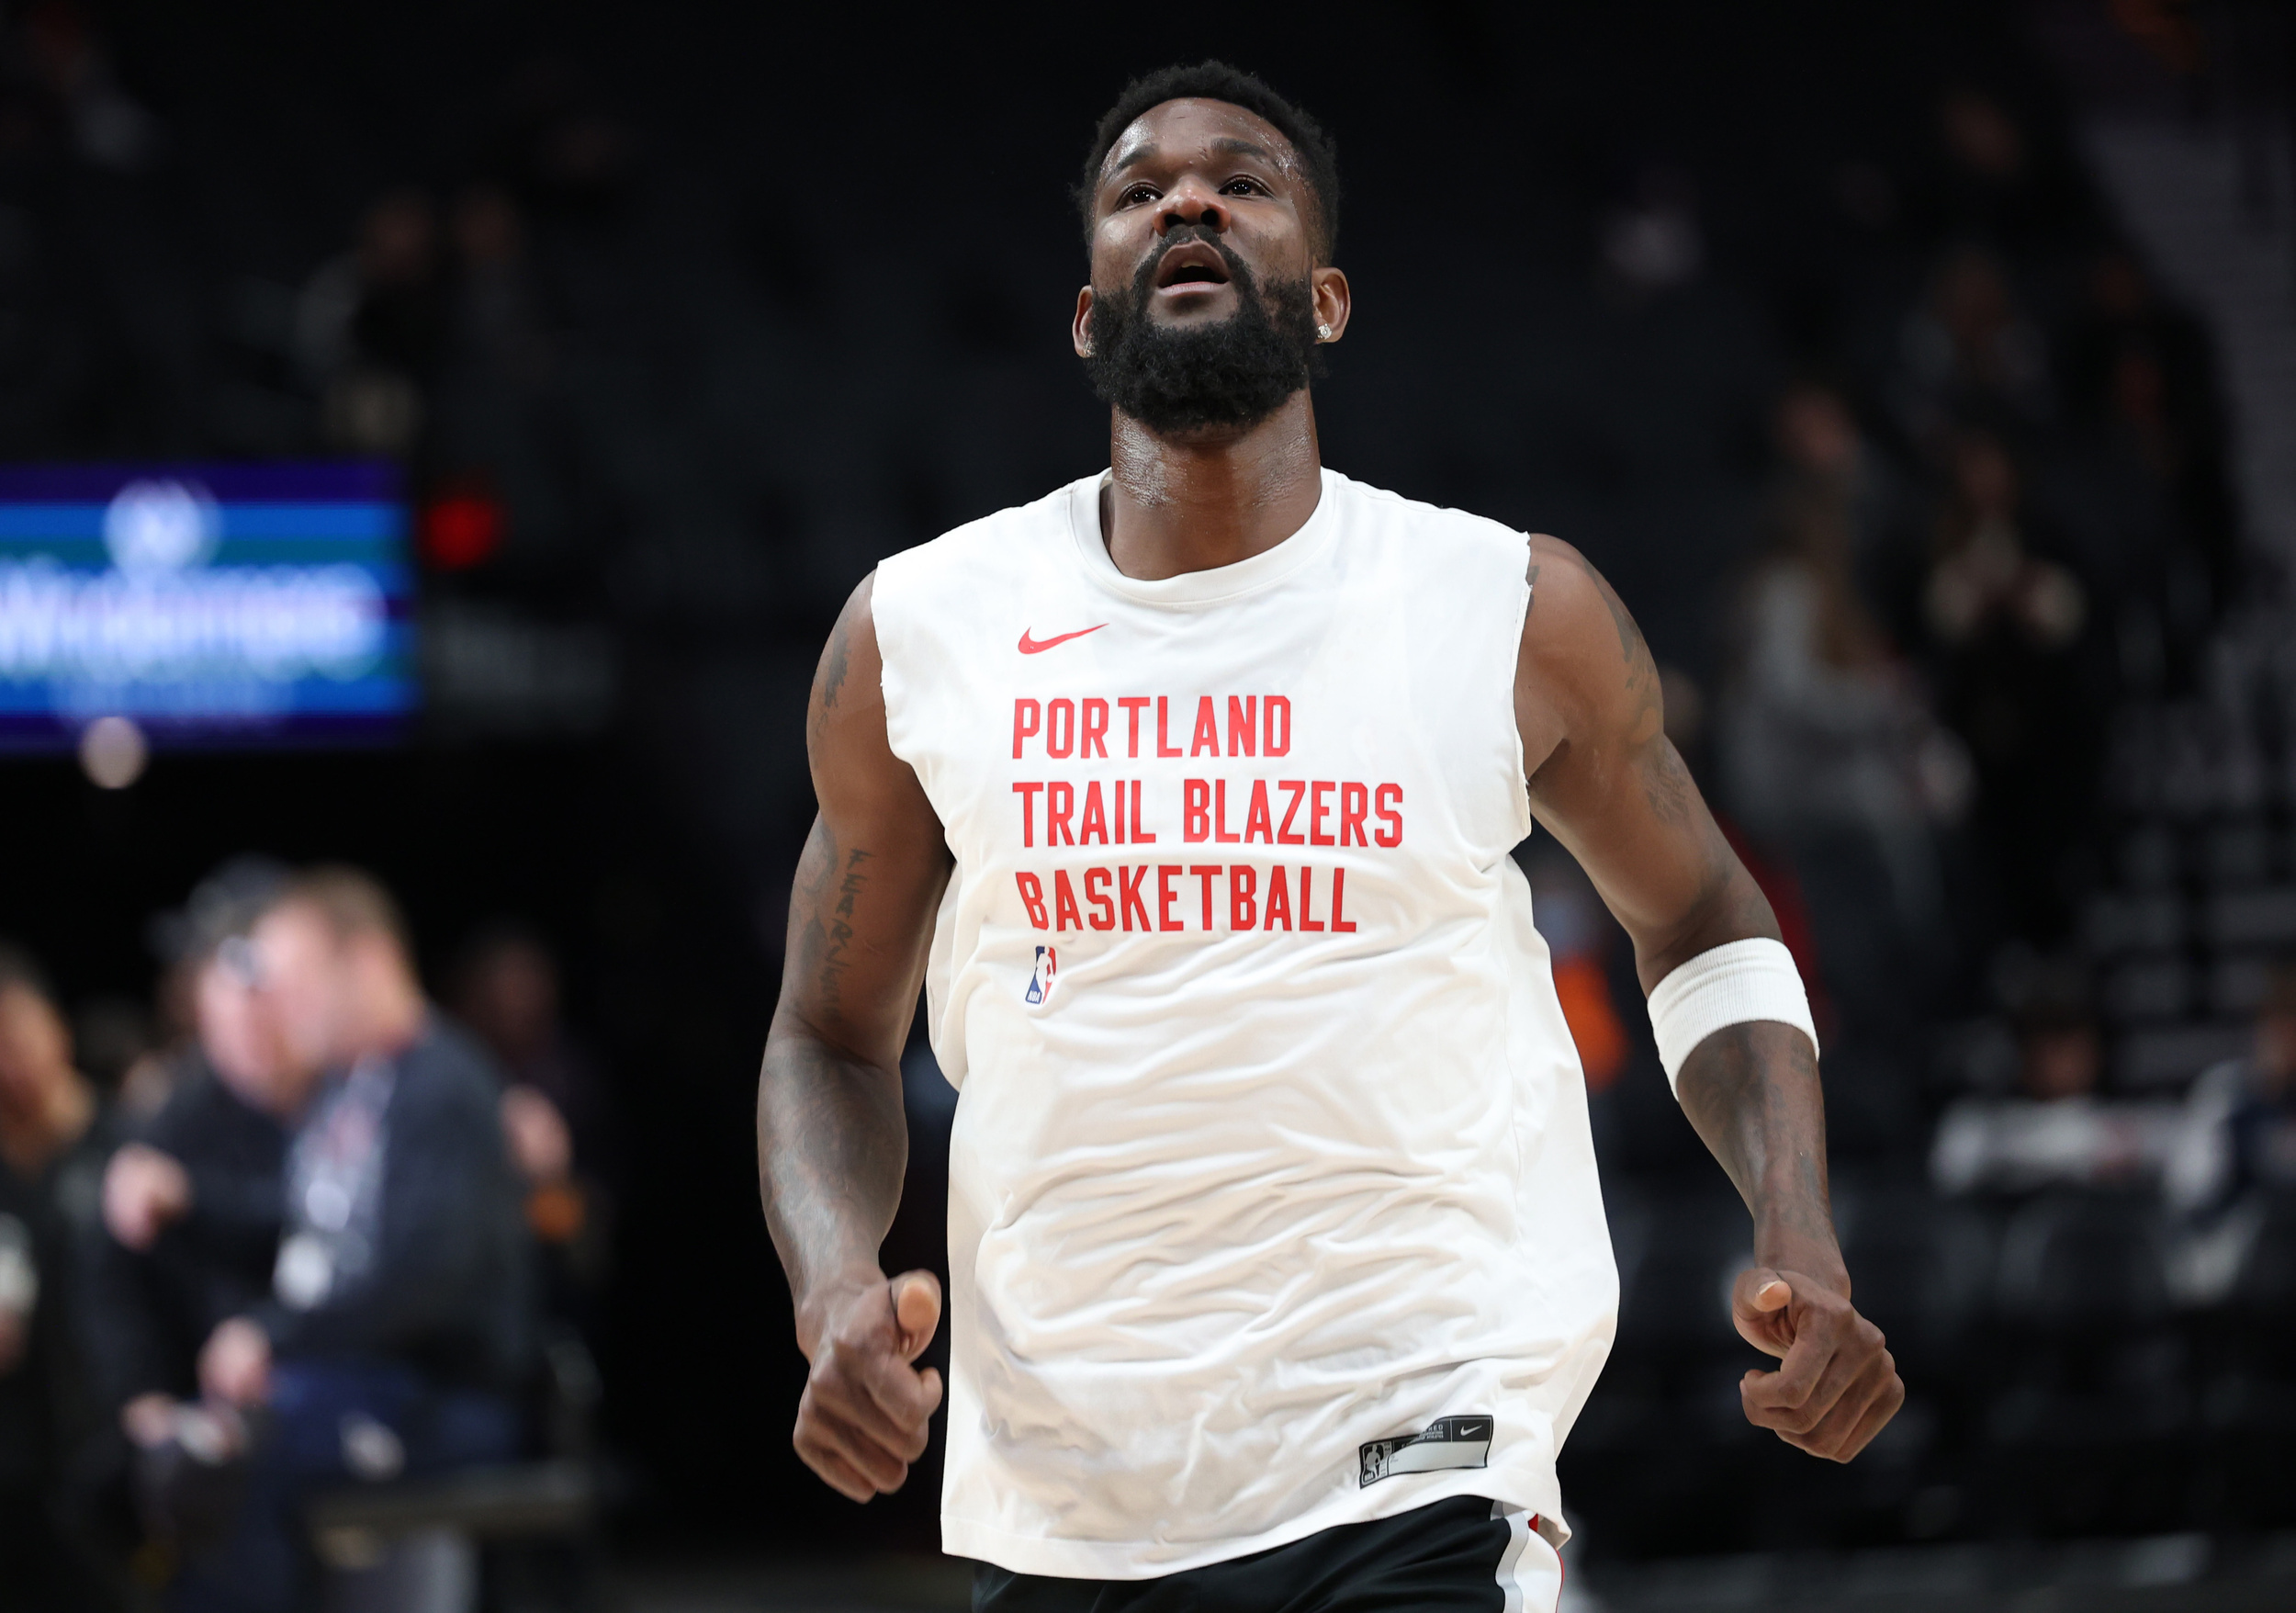 report: trail blazers center deandre ayton has had ugly start with team